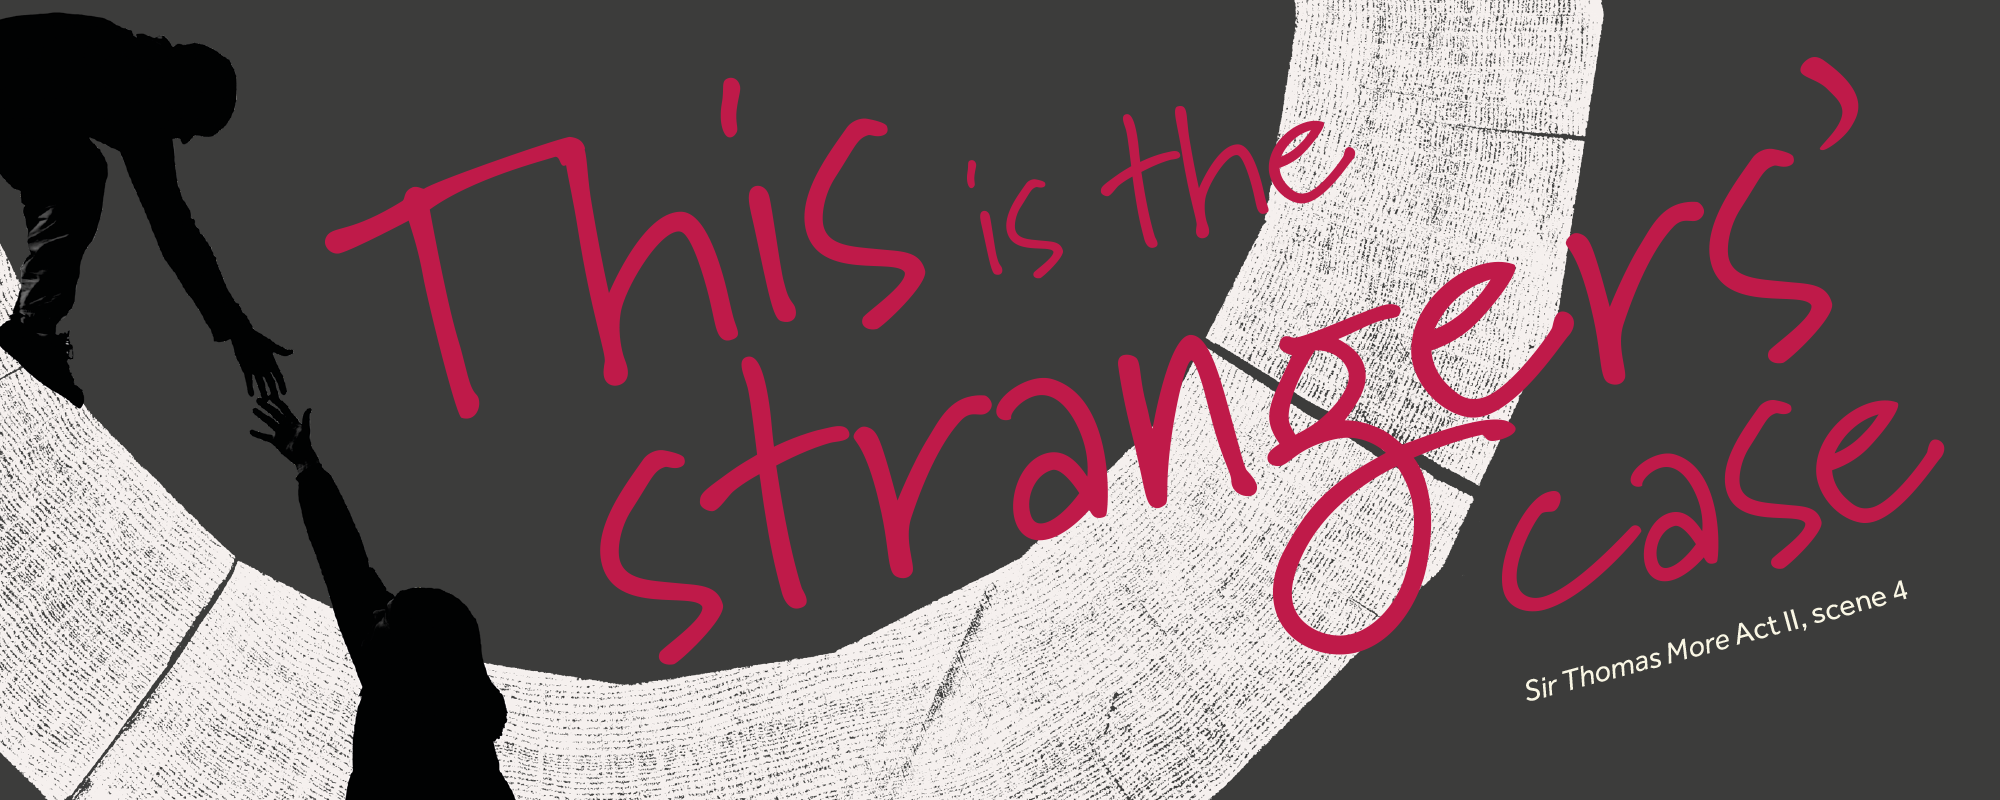 A silhouette of two people reach out to each other, with the text: This is the strangers' case